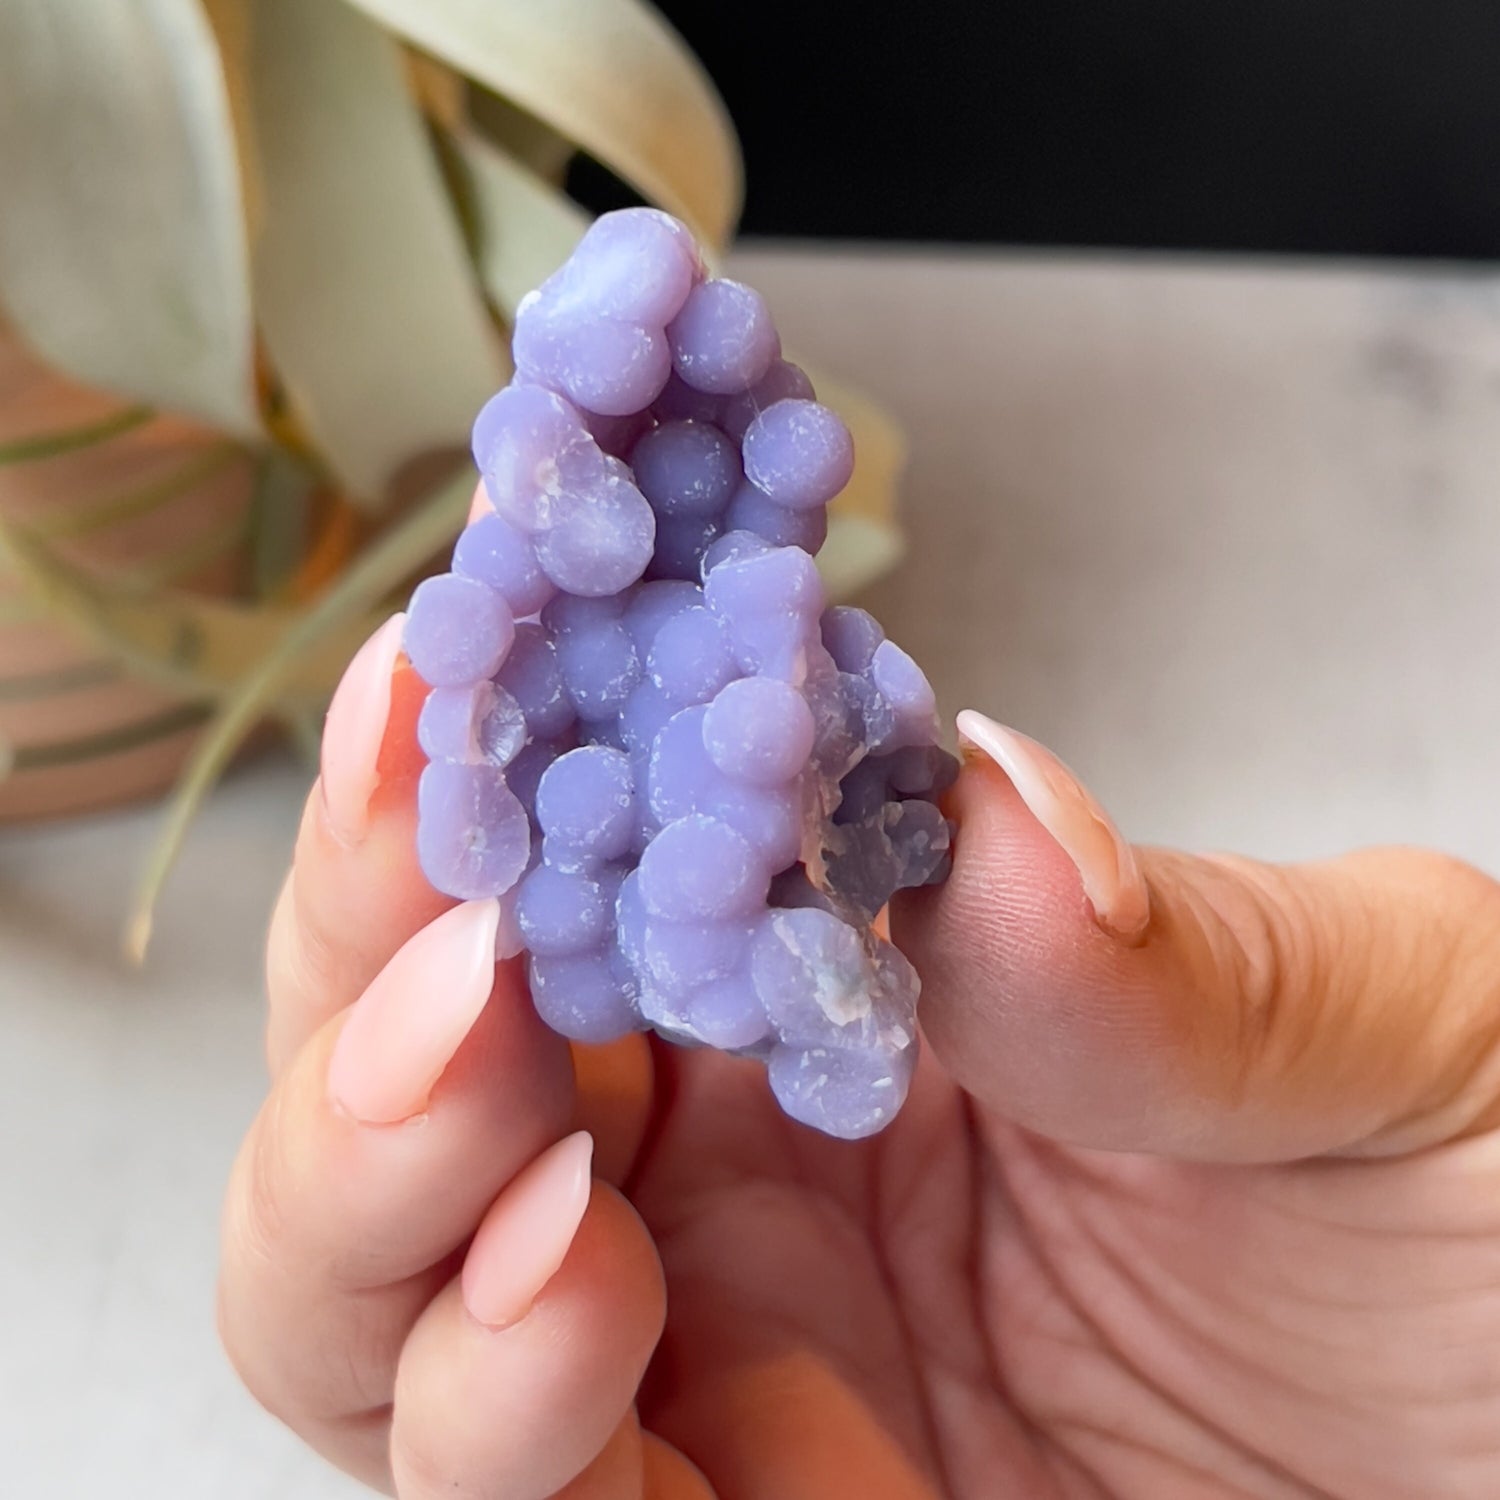 Sparkly Grape Agate Cluster with Druzy | Purple Botryoidal Chalcedony Crystal Specimen